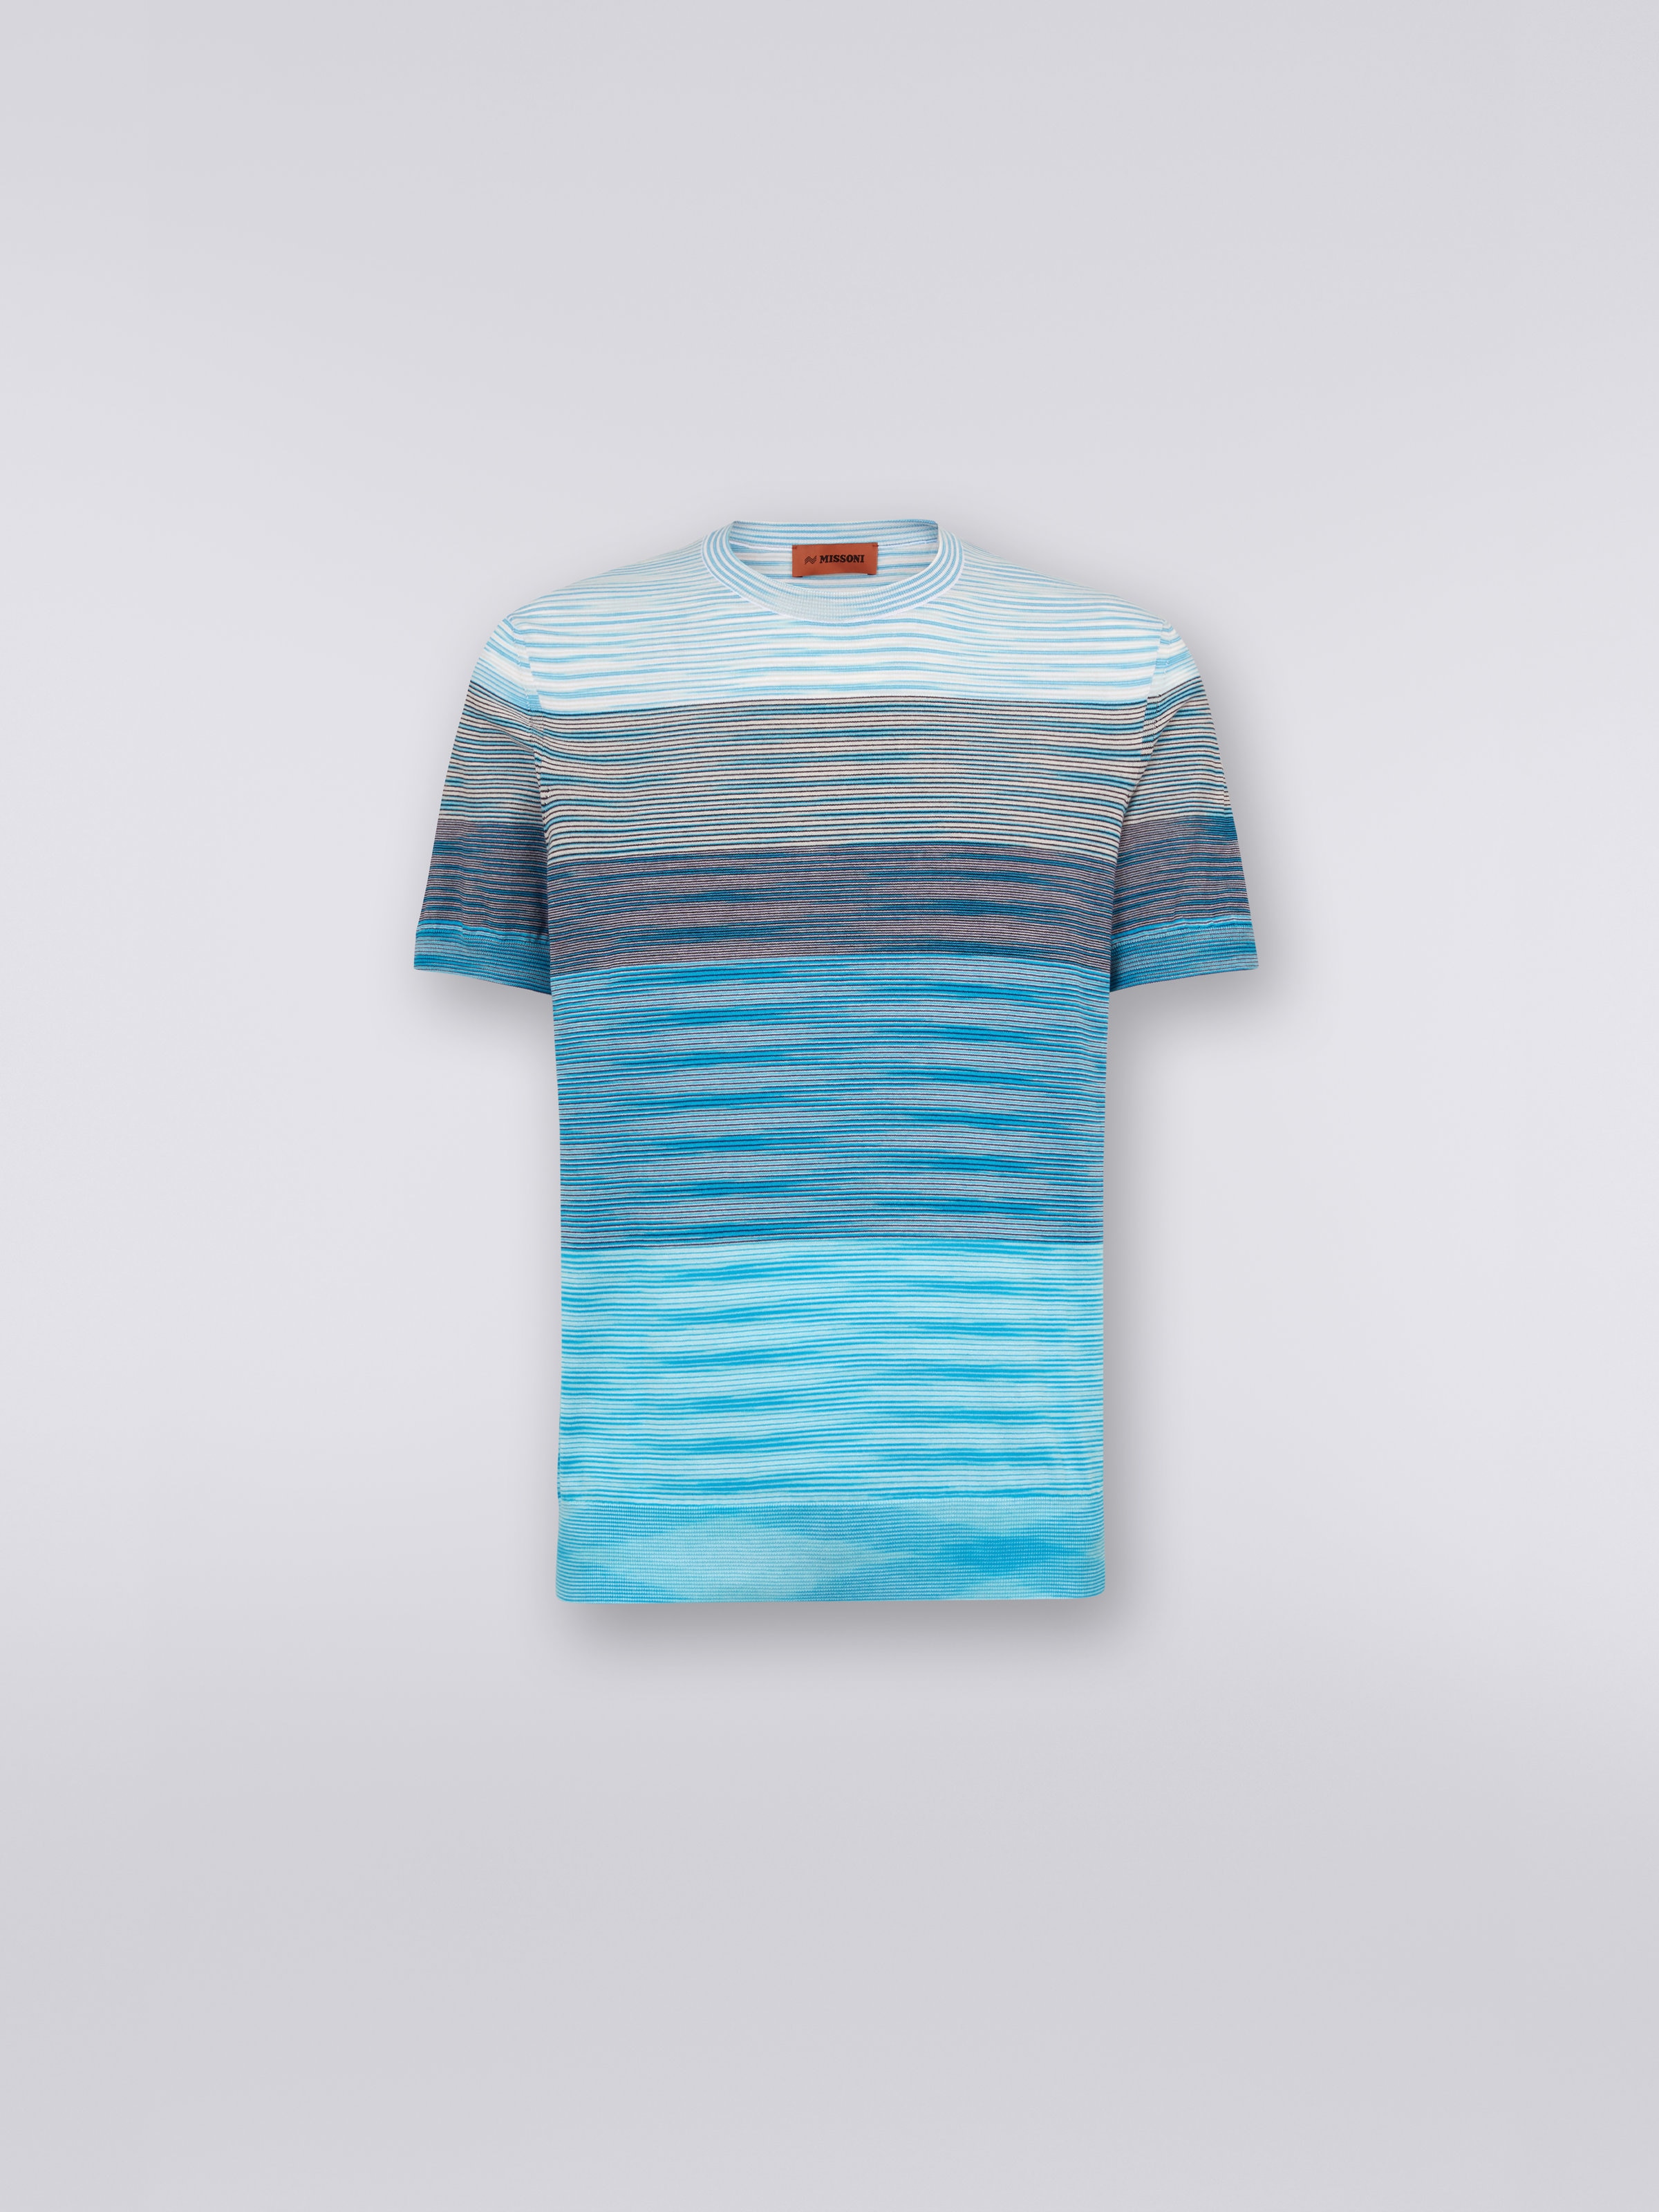 Short-sleeved crew-neck T-shirt in cotton knit with dégradé stripes, White & Sky Blue - 0